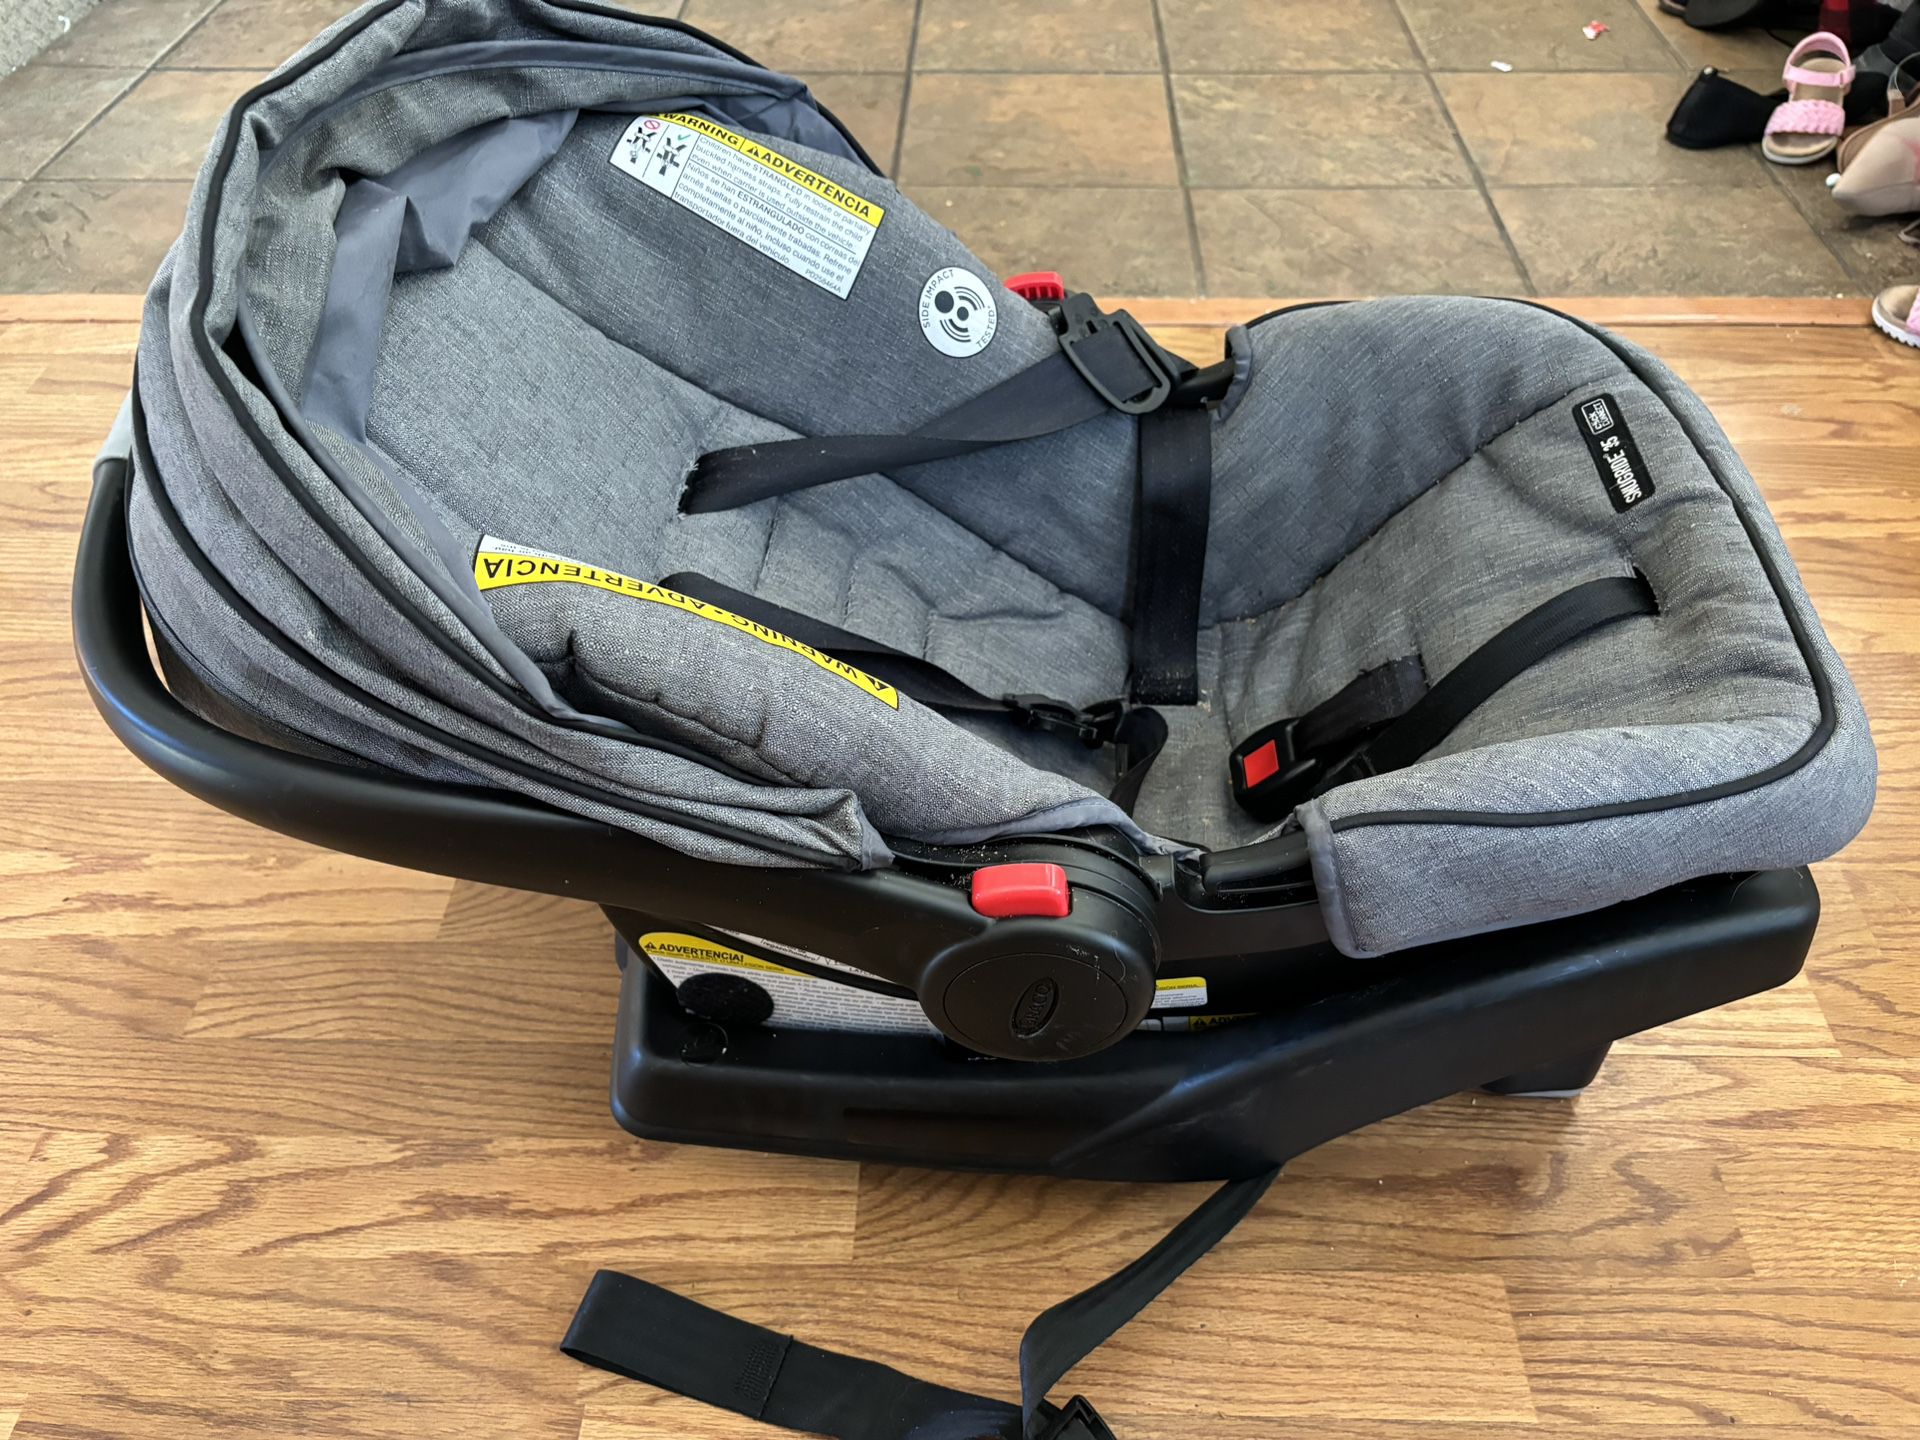 CAR SEAT AND BASE WITH MATCHING STROLLER